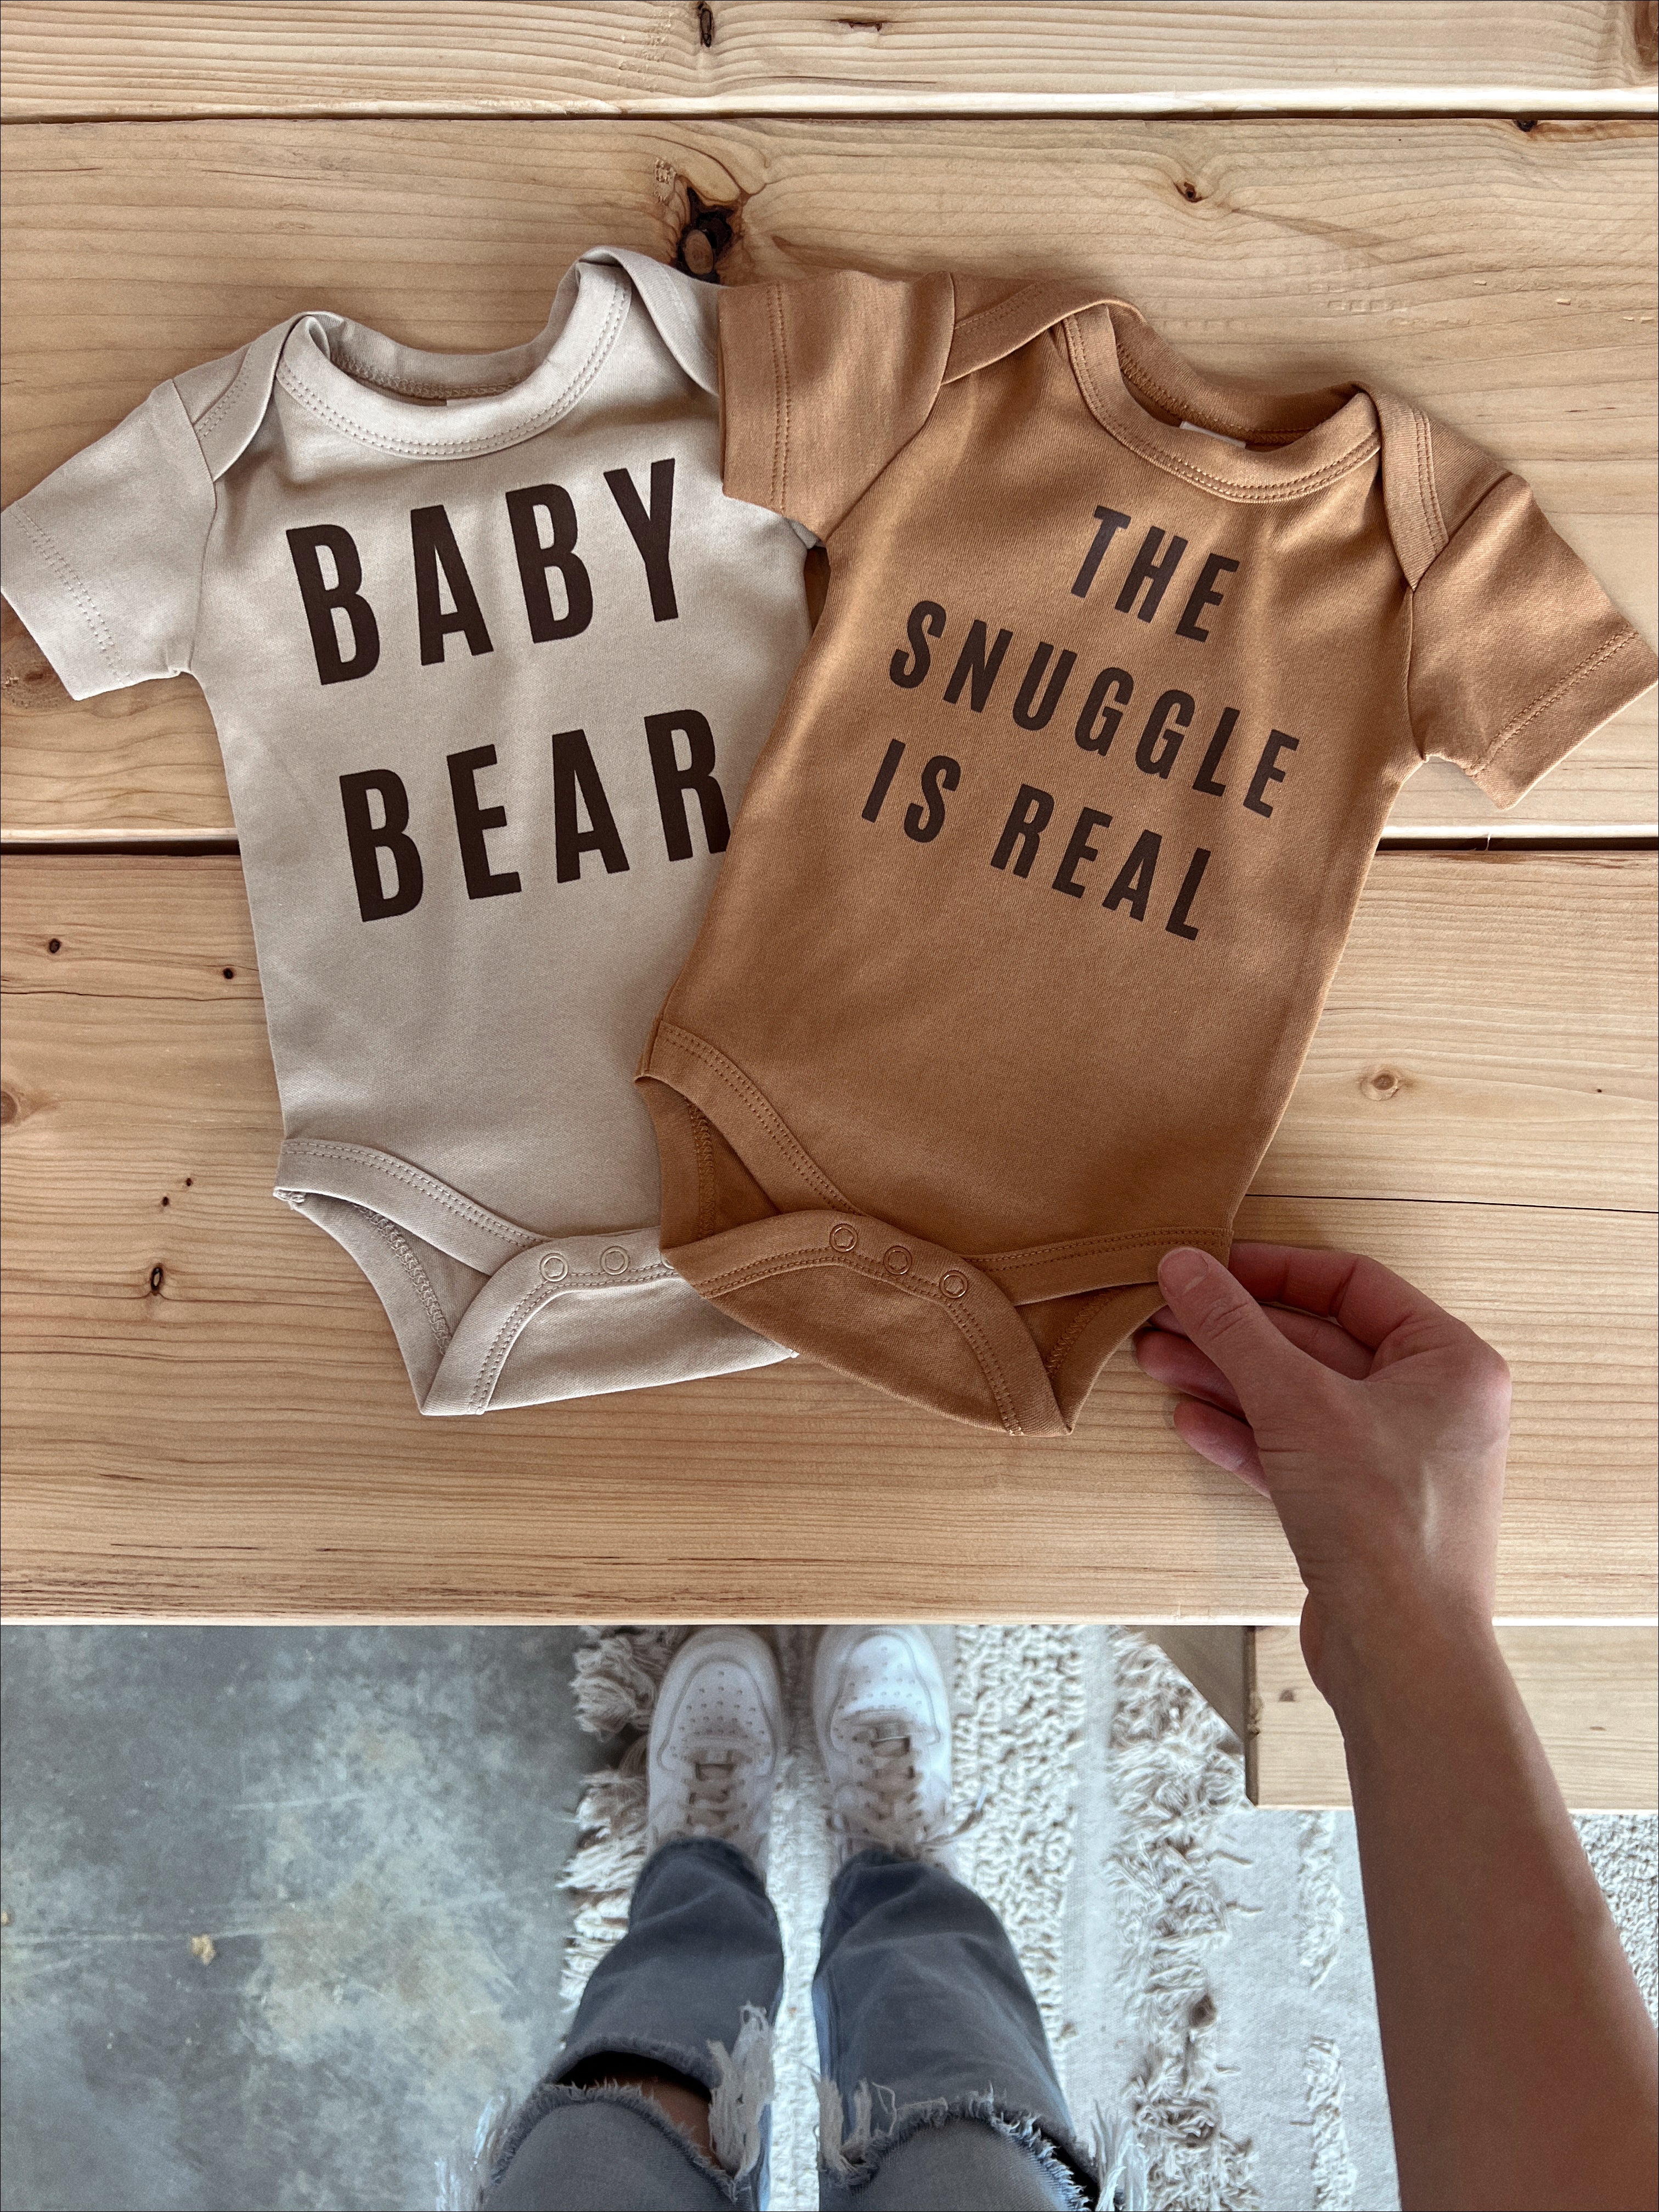 The Snuggle Is Real Organic Onesie